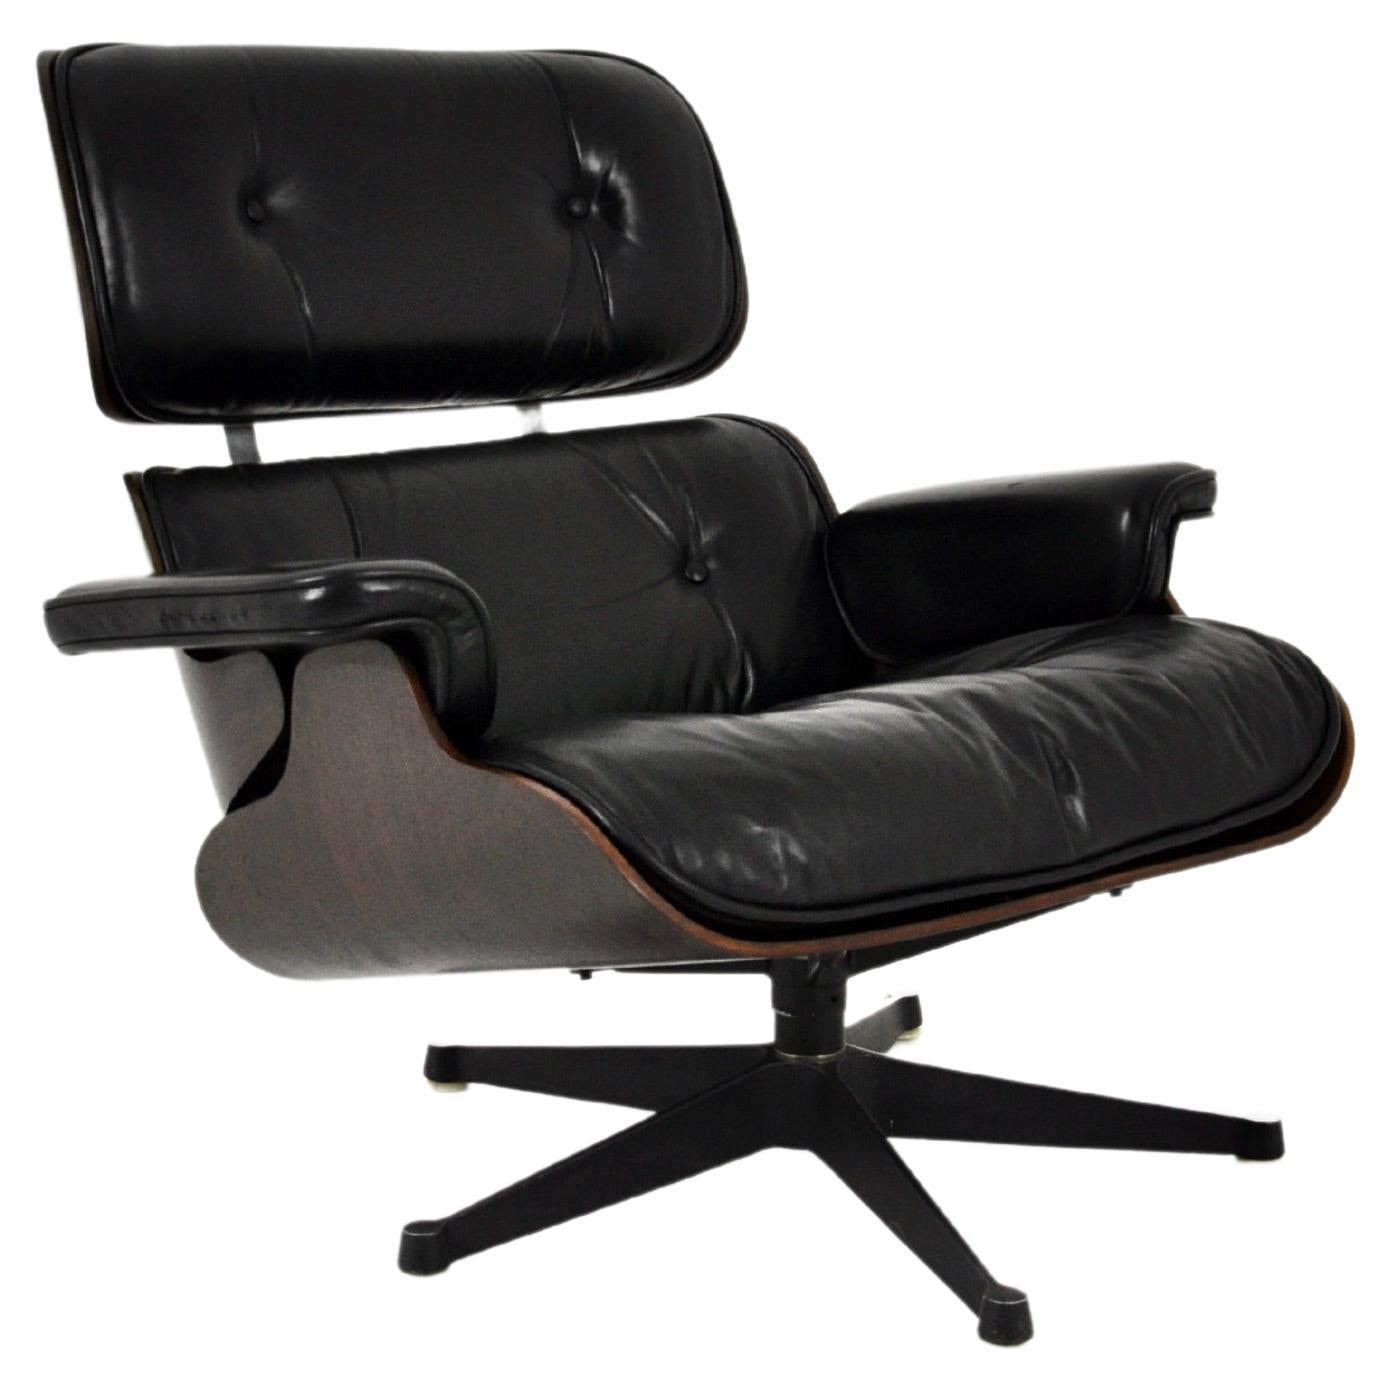 Lounge Chair by Charles and Ray Eames for ICF Herman Miller, 1970s